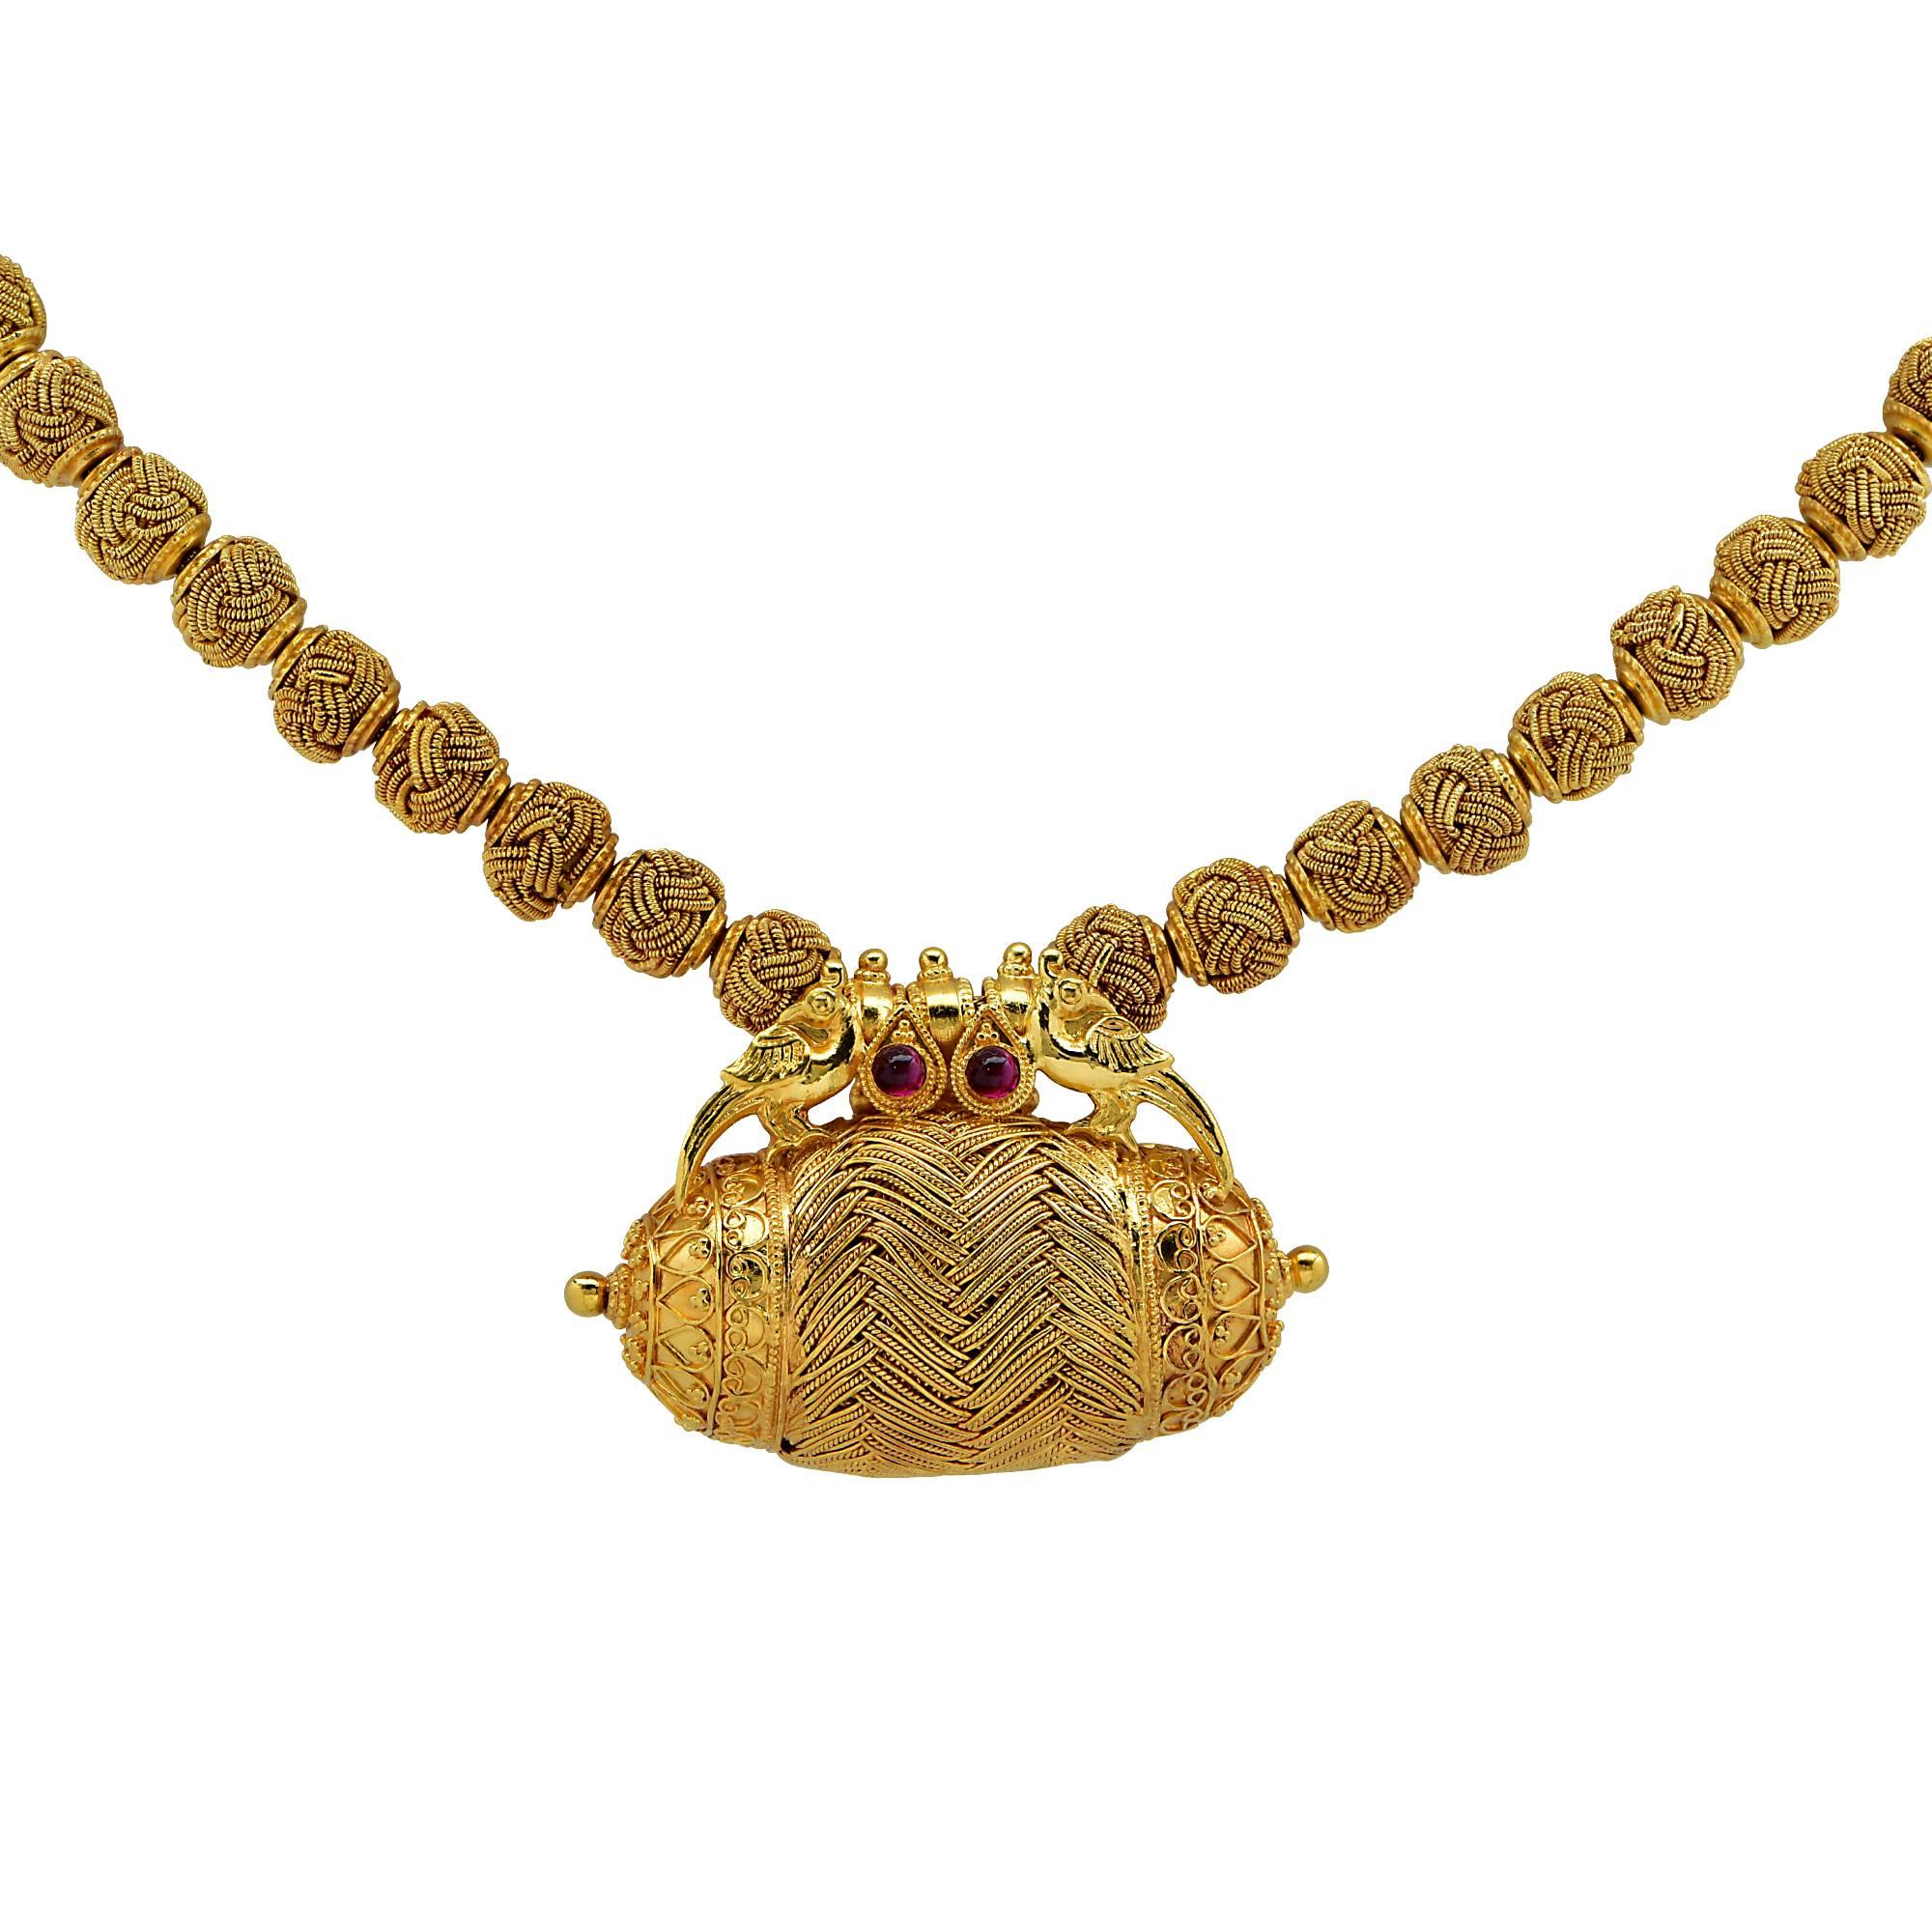 This beautifully crafted 22 karat Yellow Gold necklace boasts an amulet suspended from a 22 Karat Yellow Gold beaded necklace. Each bead is crafted with an intricate woven detail. Perched on the amulet is a pair of pheasants with two rubies resting